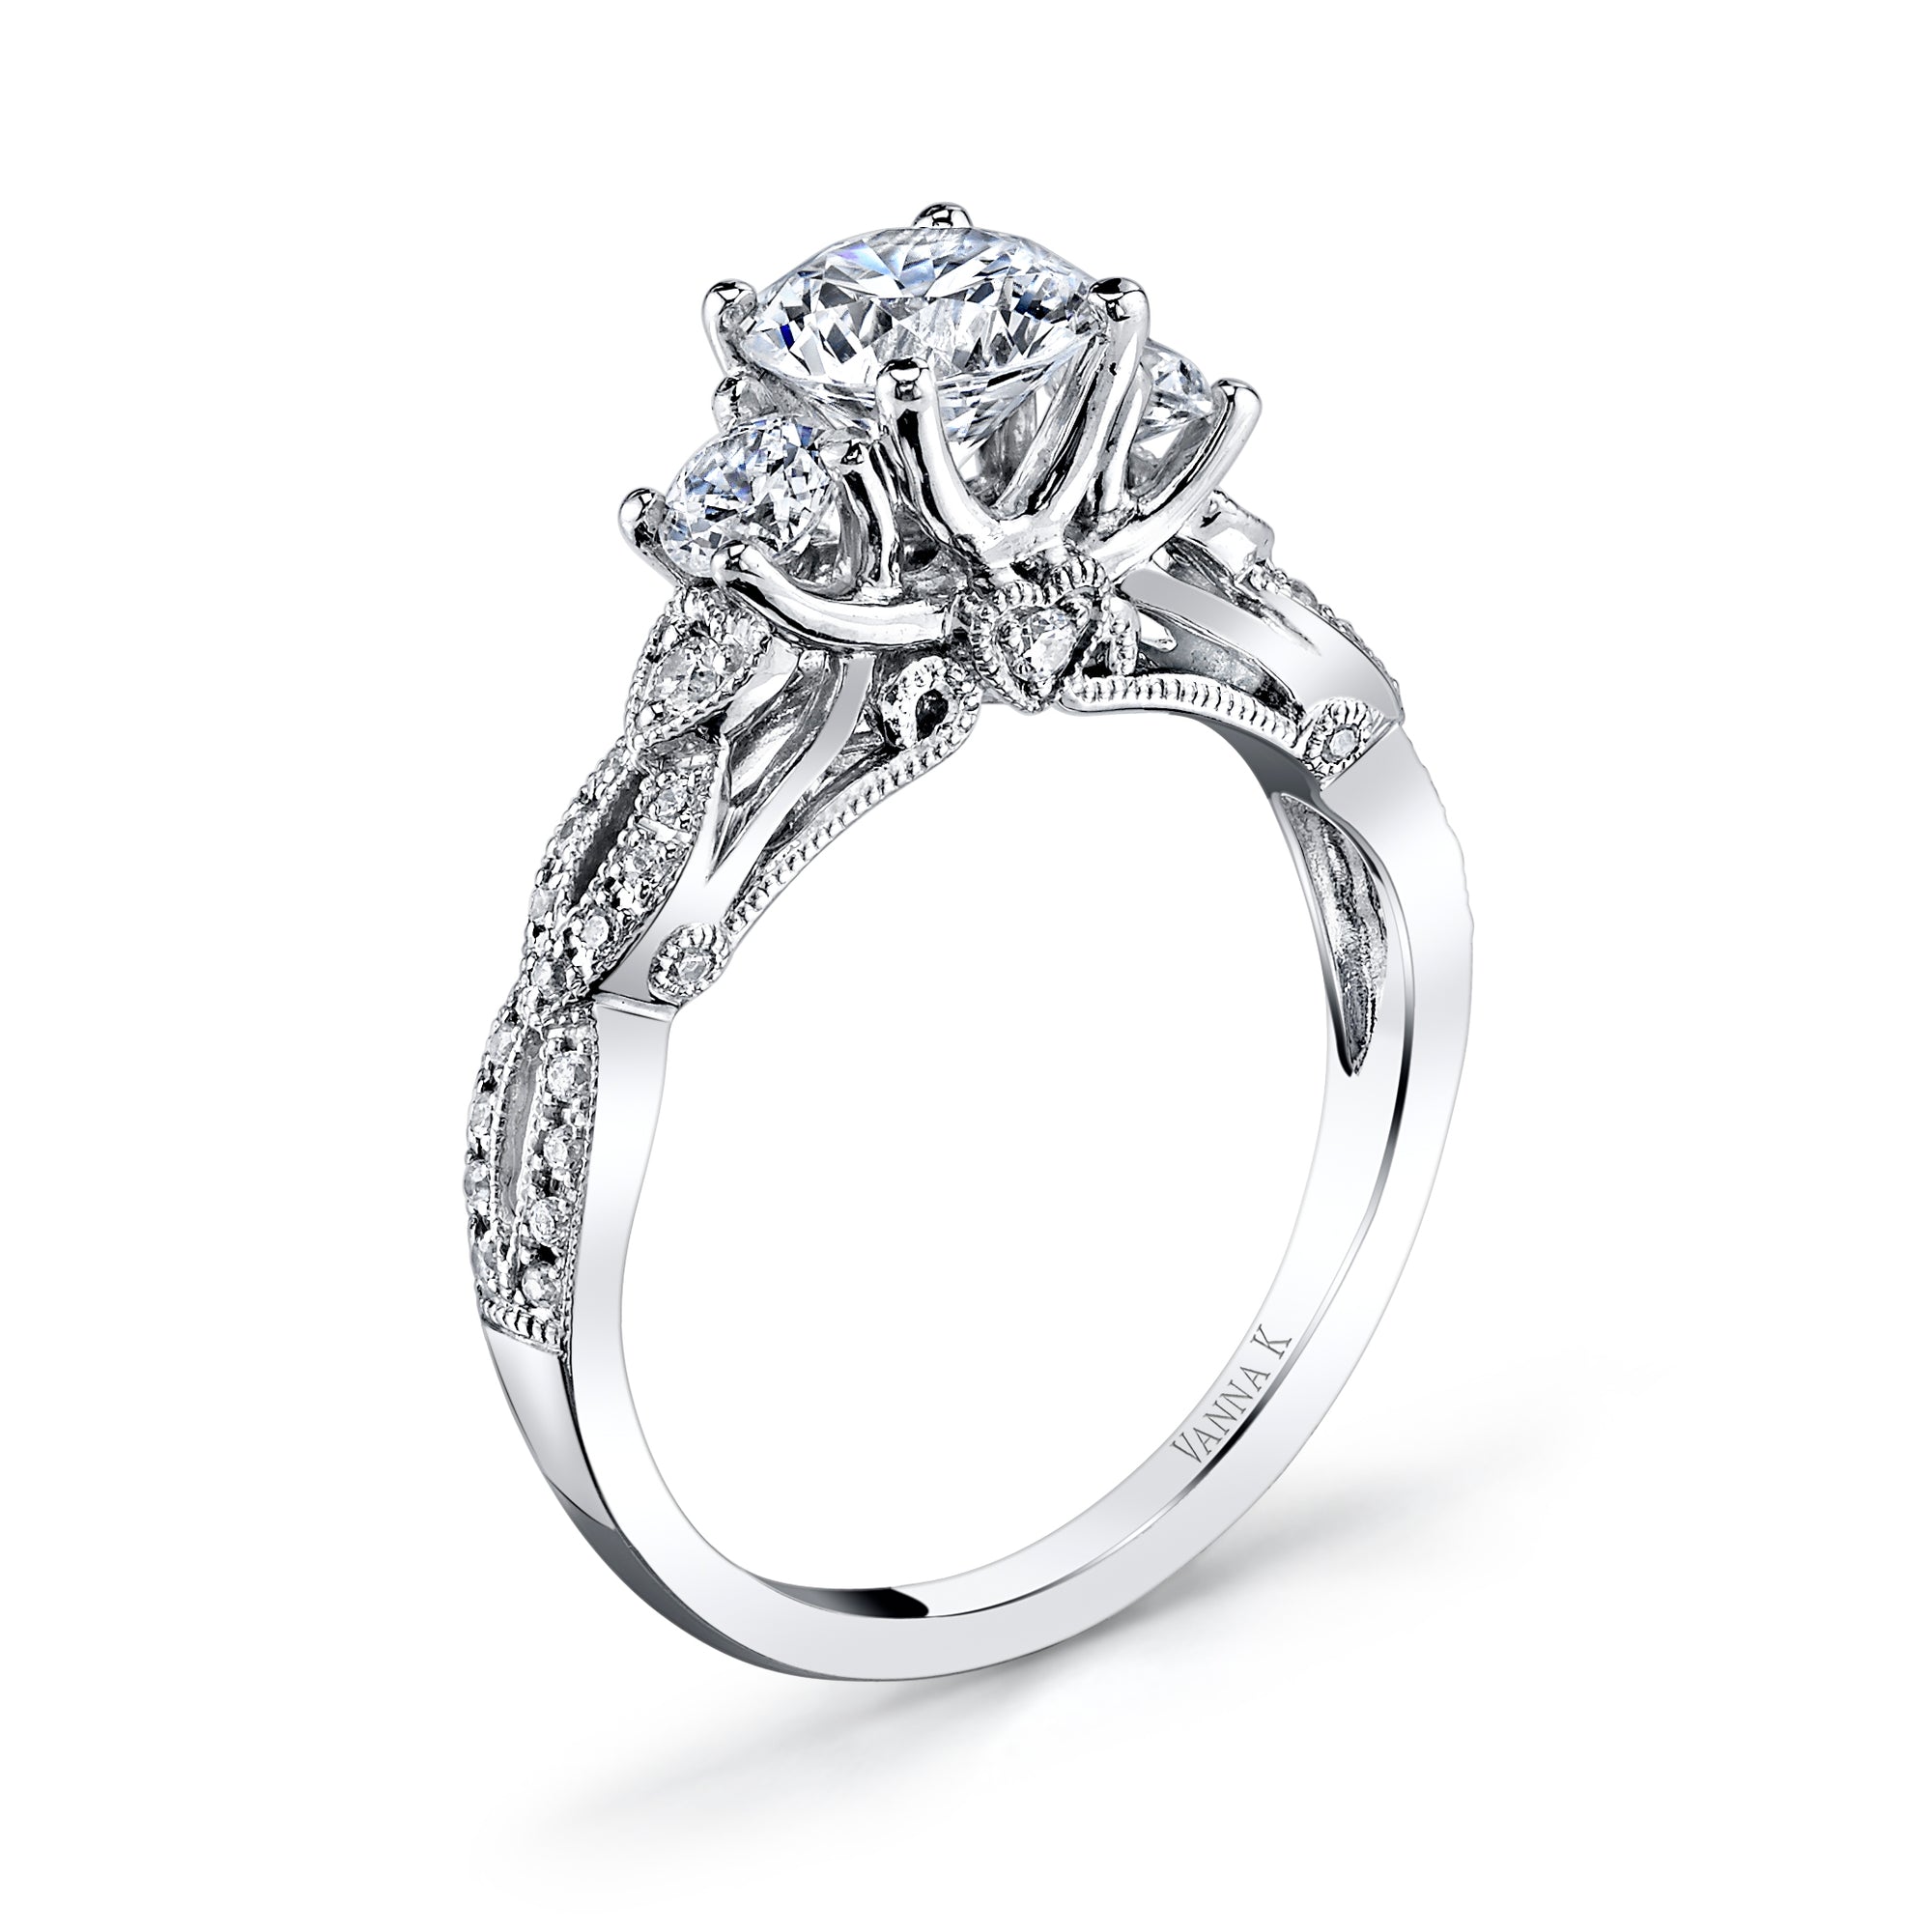 Classic Solitaire Round Diamond Ring in 18K White Gold - 4 prongs-2